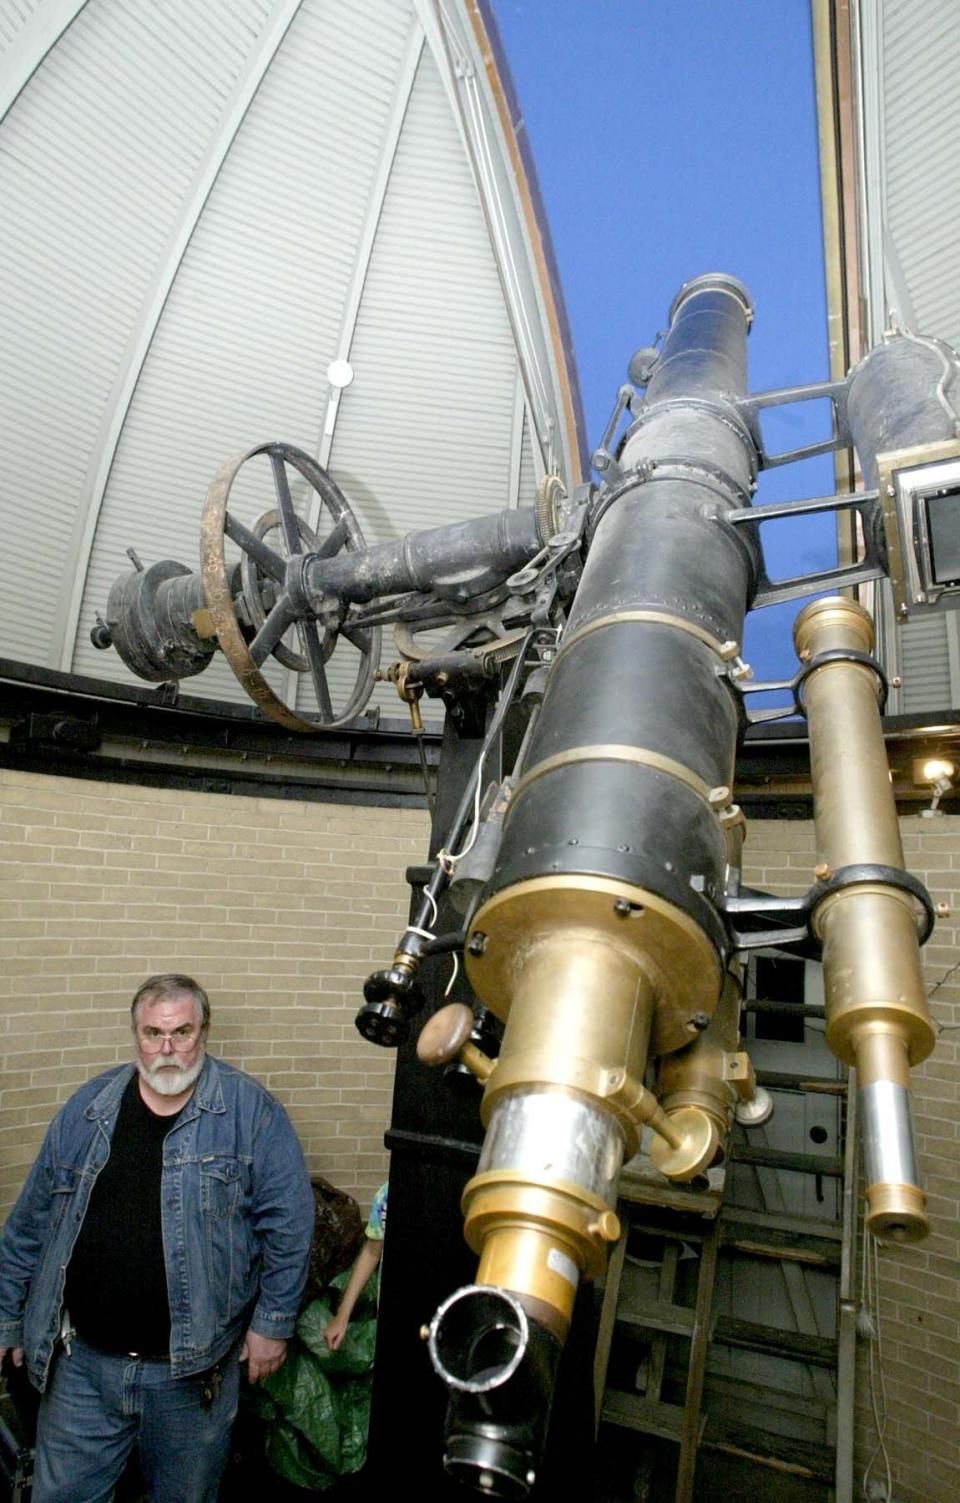 From 2005: The Drake Municipal Observatory located on Waveland Golf Course holds a large telescope that Dave Lynch helps run. There are also two other telescopes on the flat roof for viewers to use.